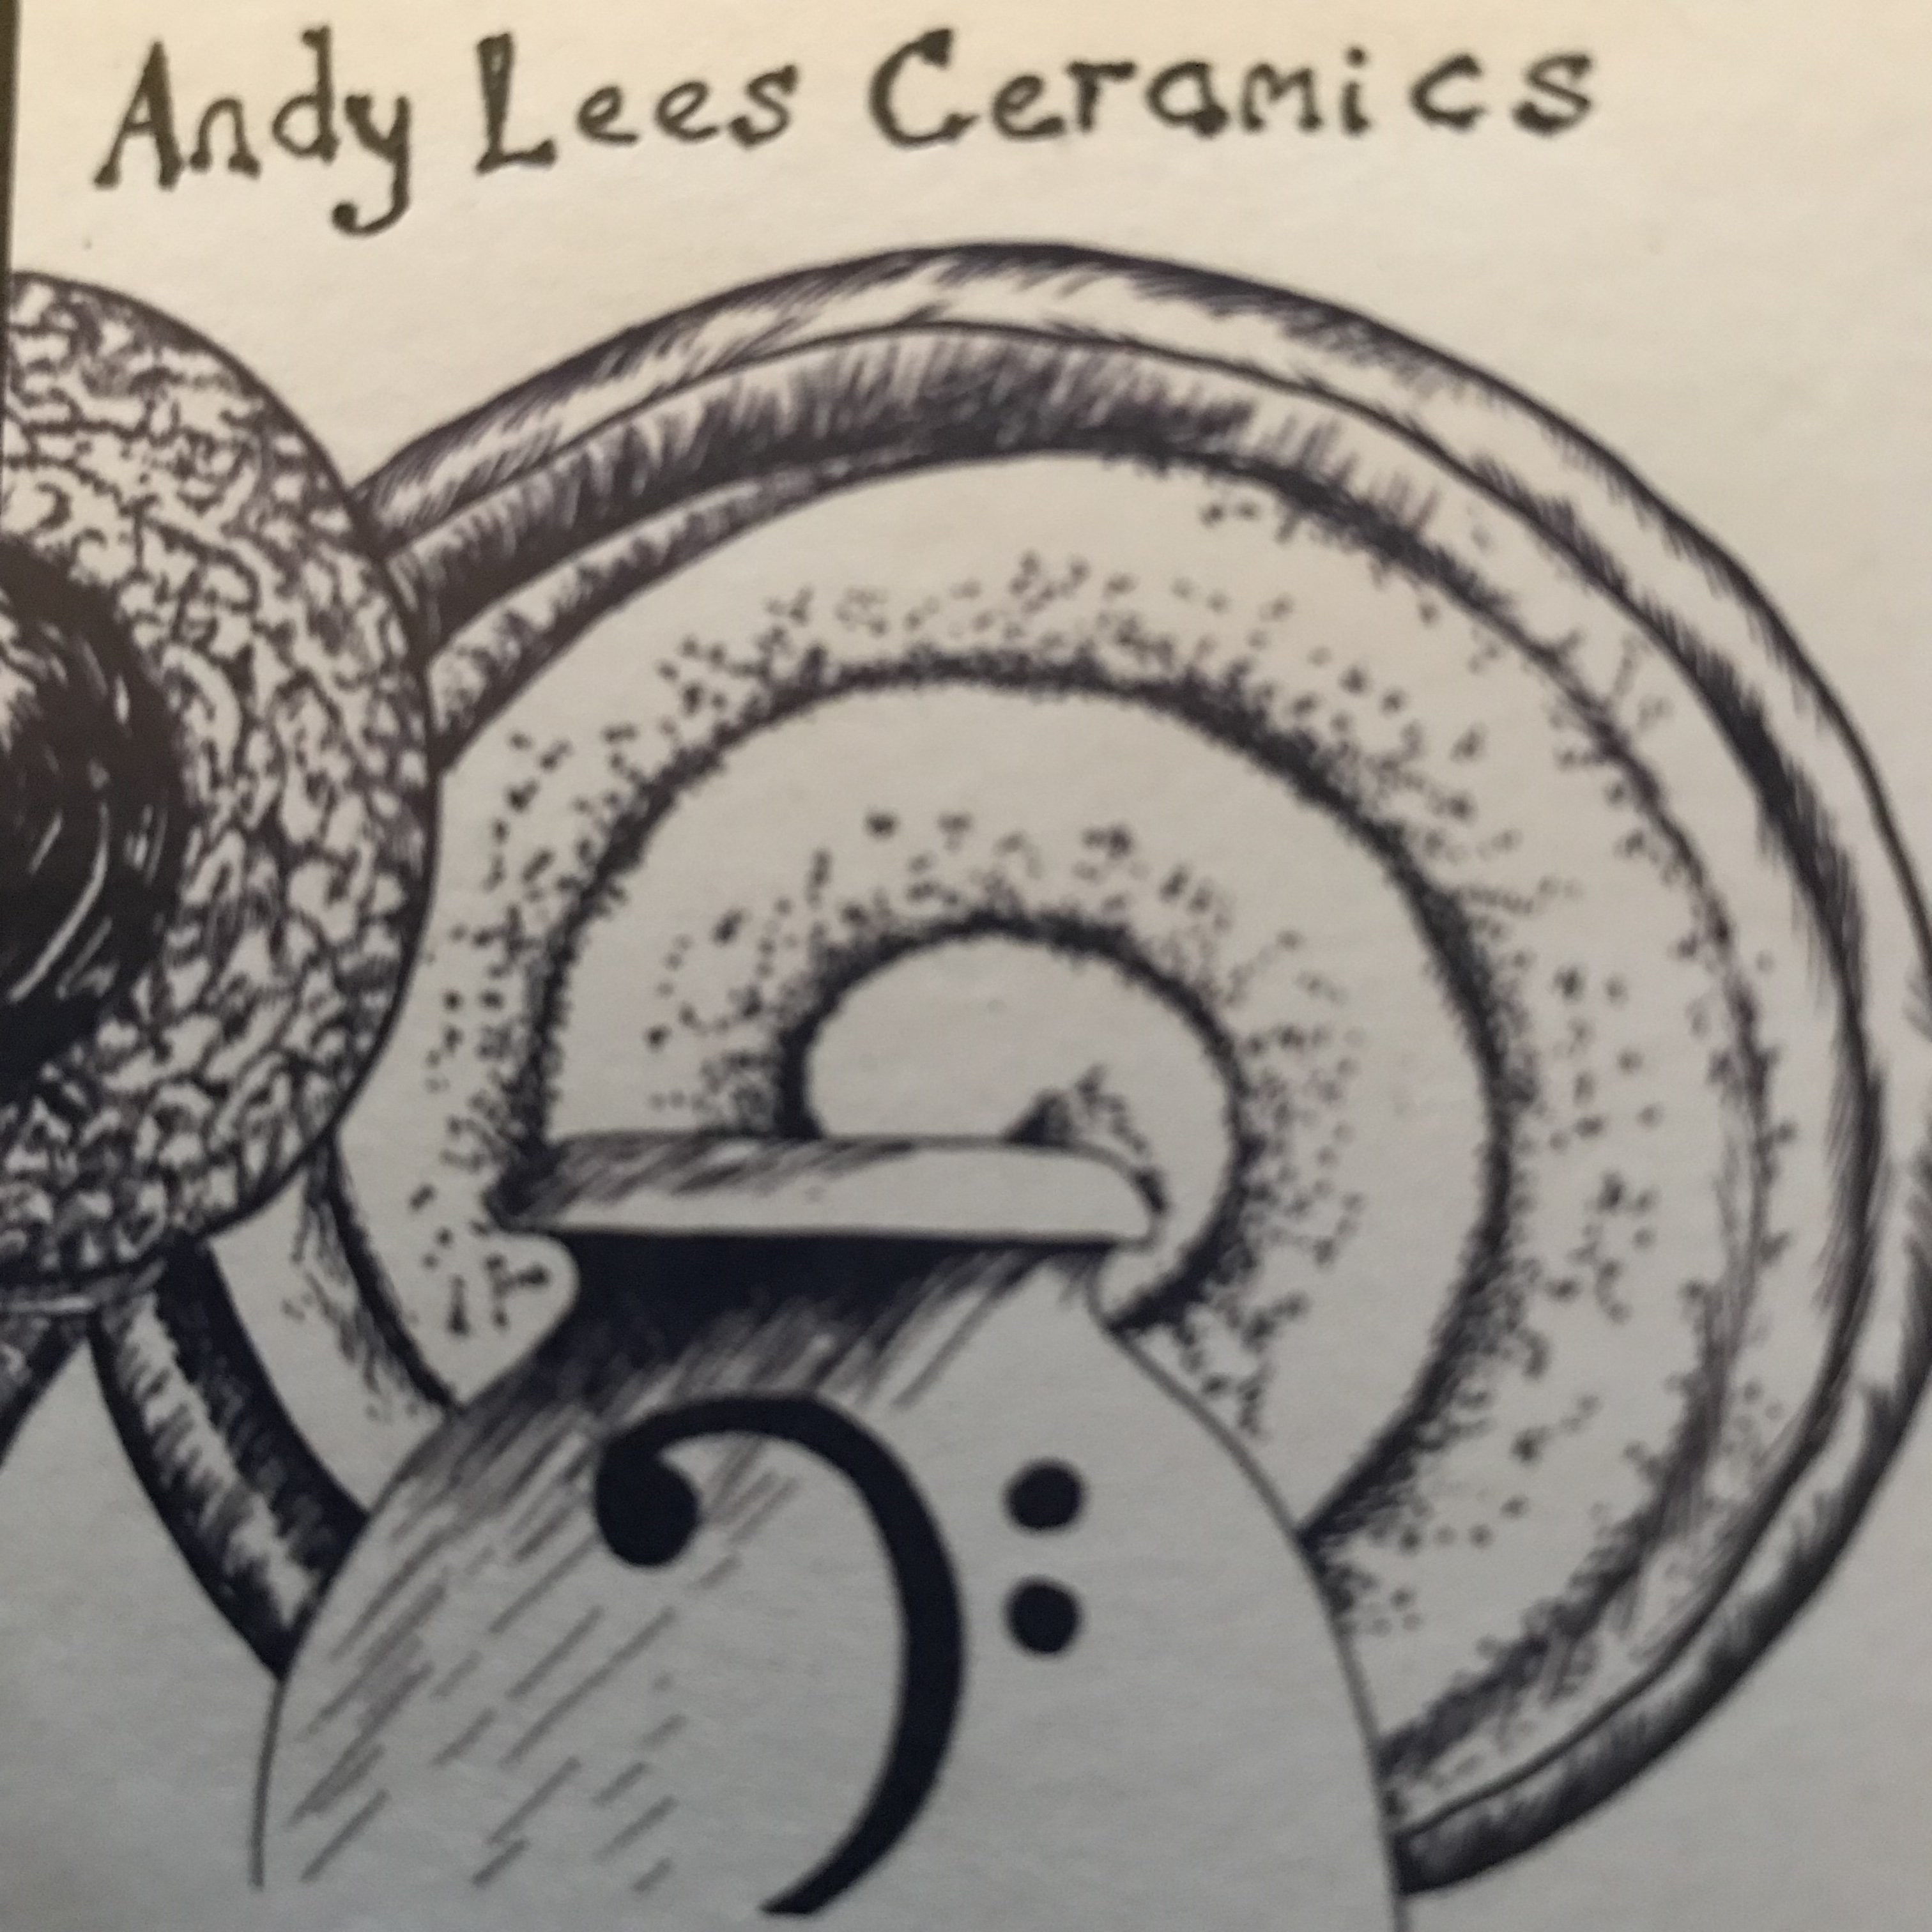 Andy Lees Ceramics - Pottery Courses And Workshops logo